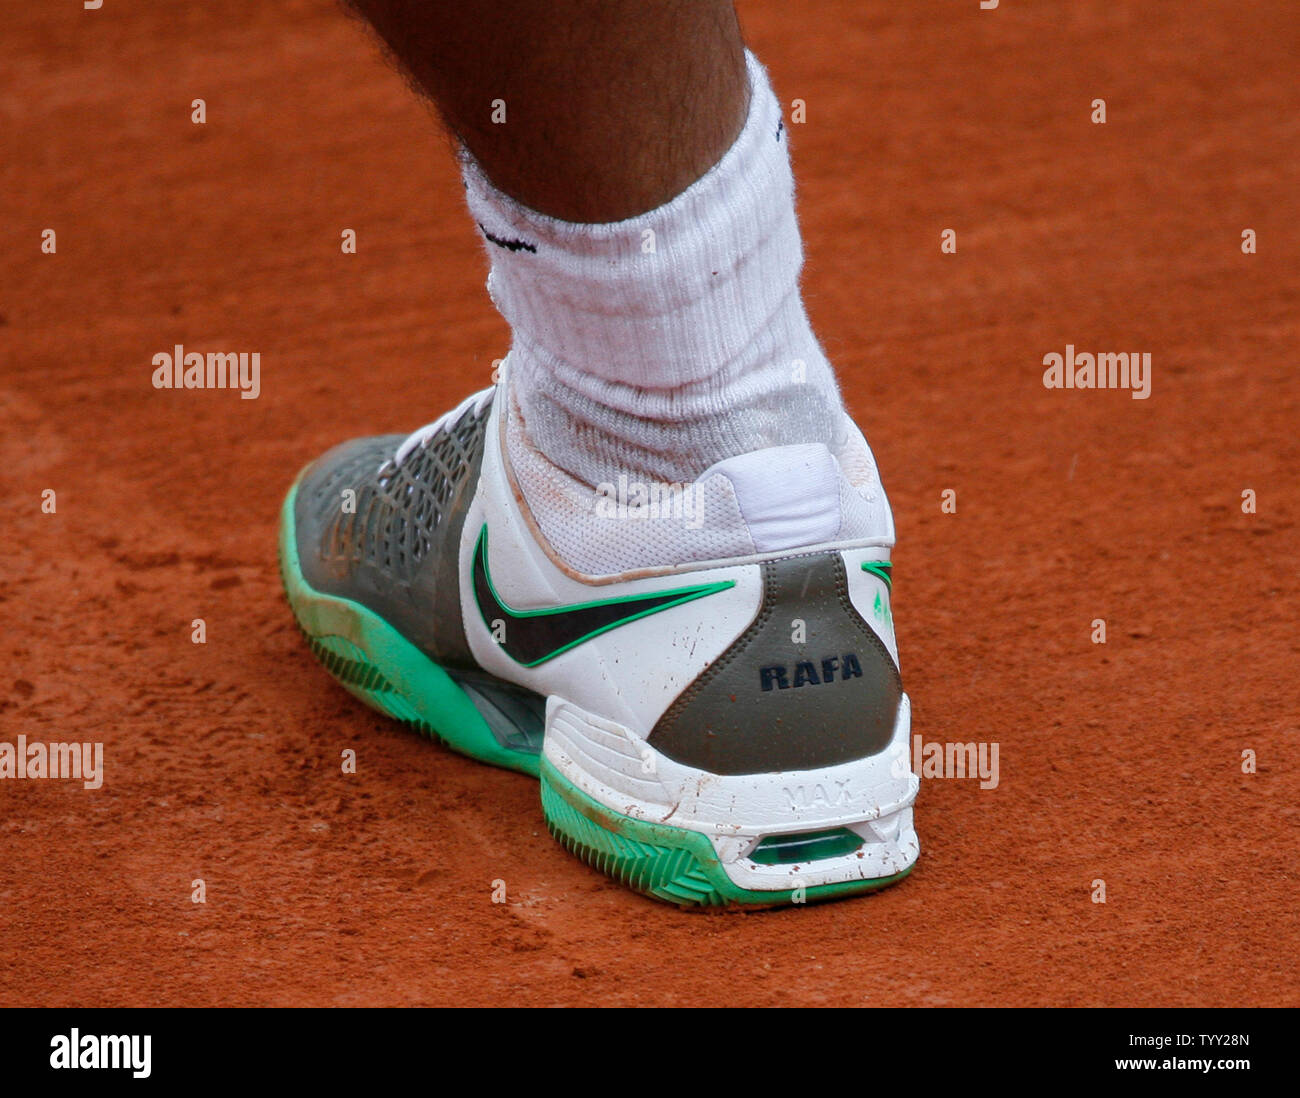 Rafael Nadal of Spain sports shoes with his nickname "Rafa" on them during  his quarterfinal match with Nicolas Almagro of Spain at the French Tennis  Open in Paris on June 3, 2008.